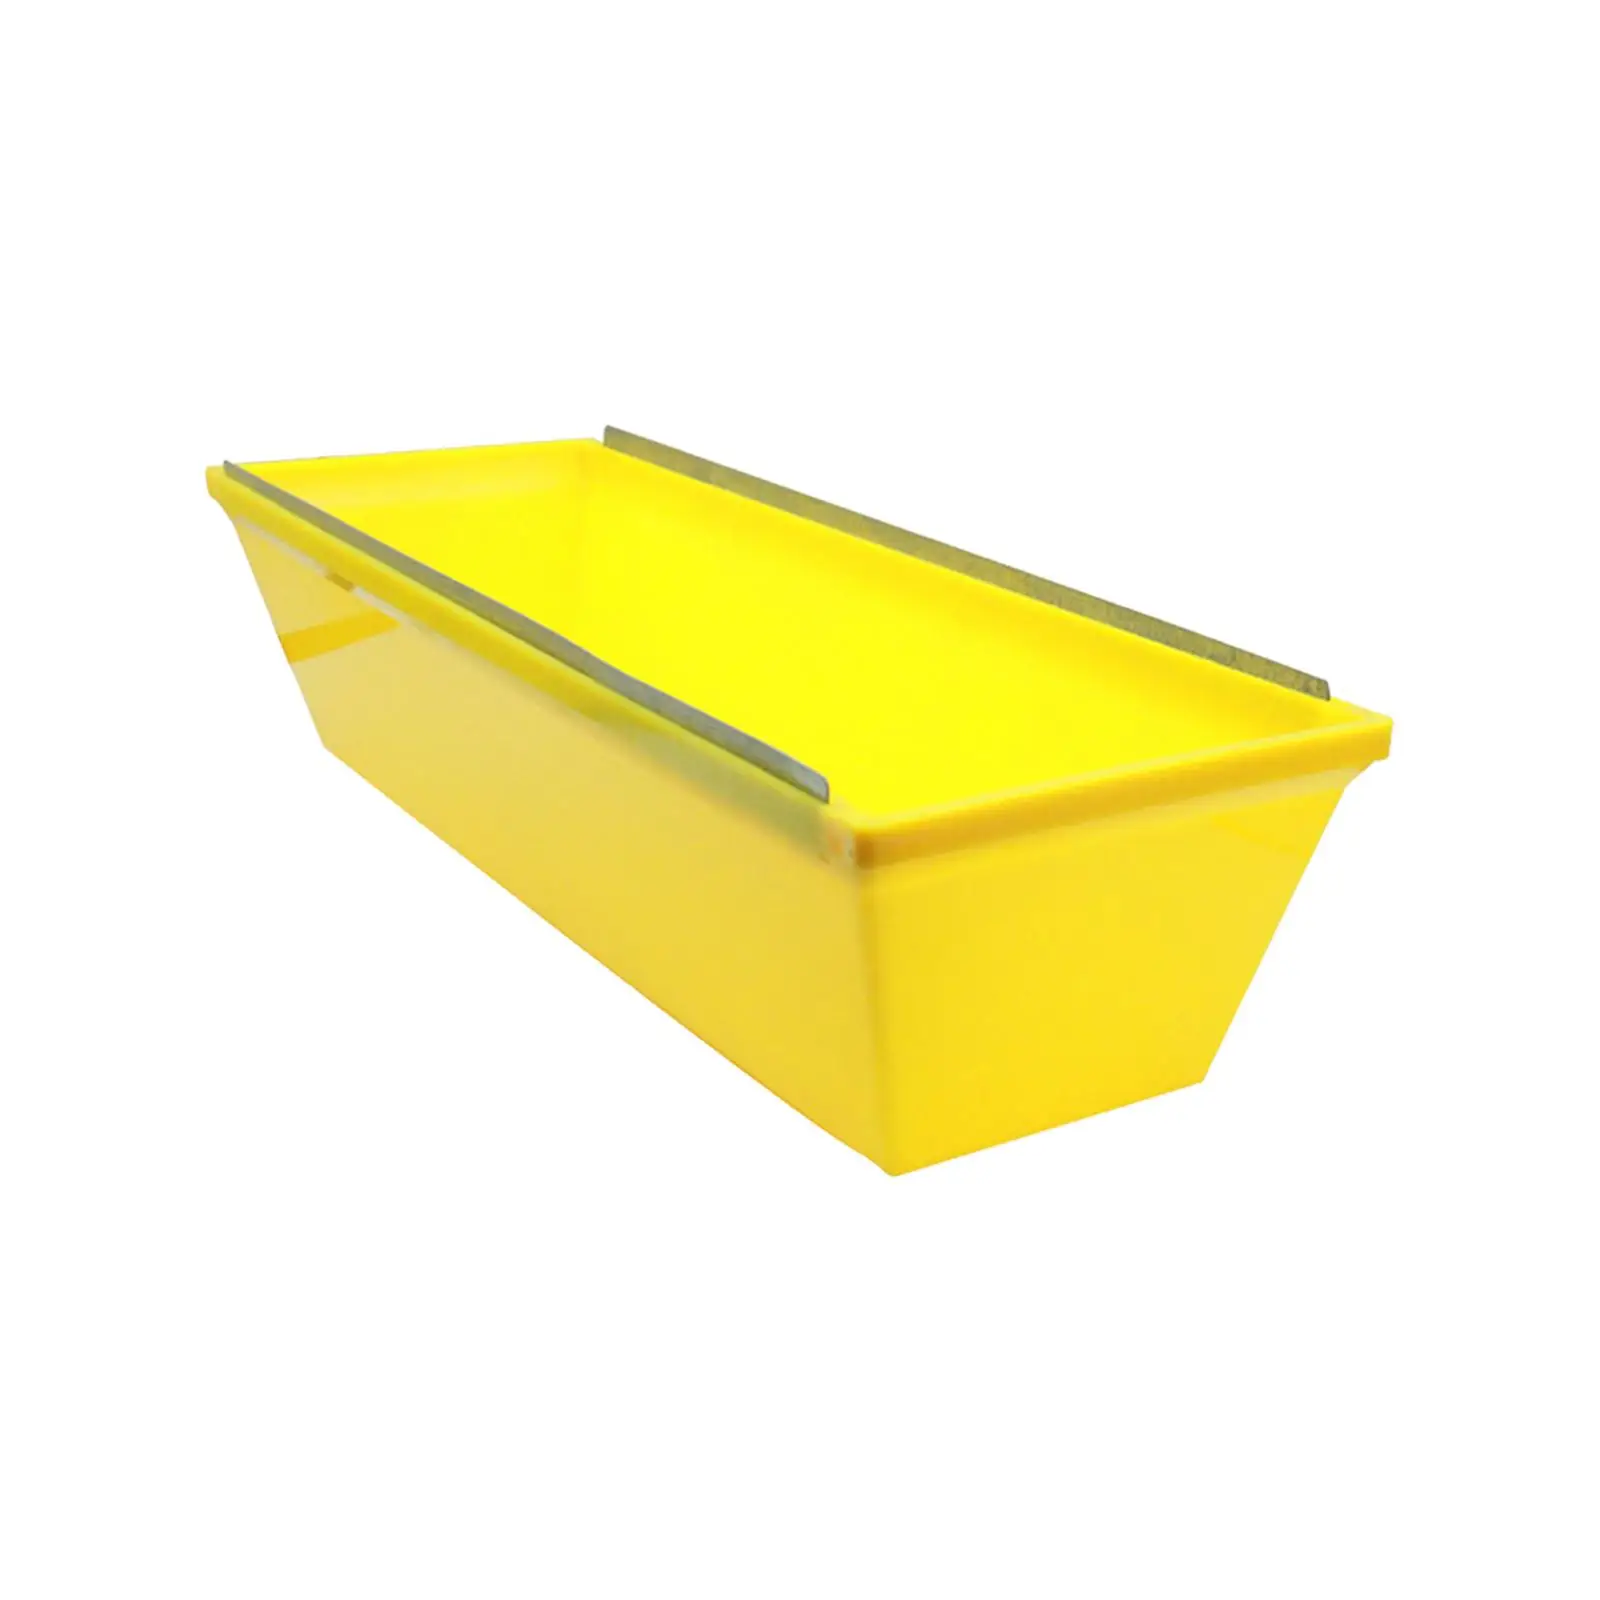 12 Mud Pan Plastering Tapered Sides Professional Easy to Clean Heavy Duty Drywall Masonry Tool Tray Bucket with Scraping Bar